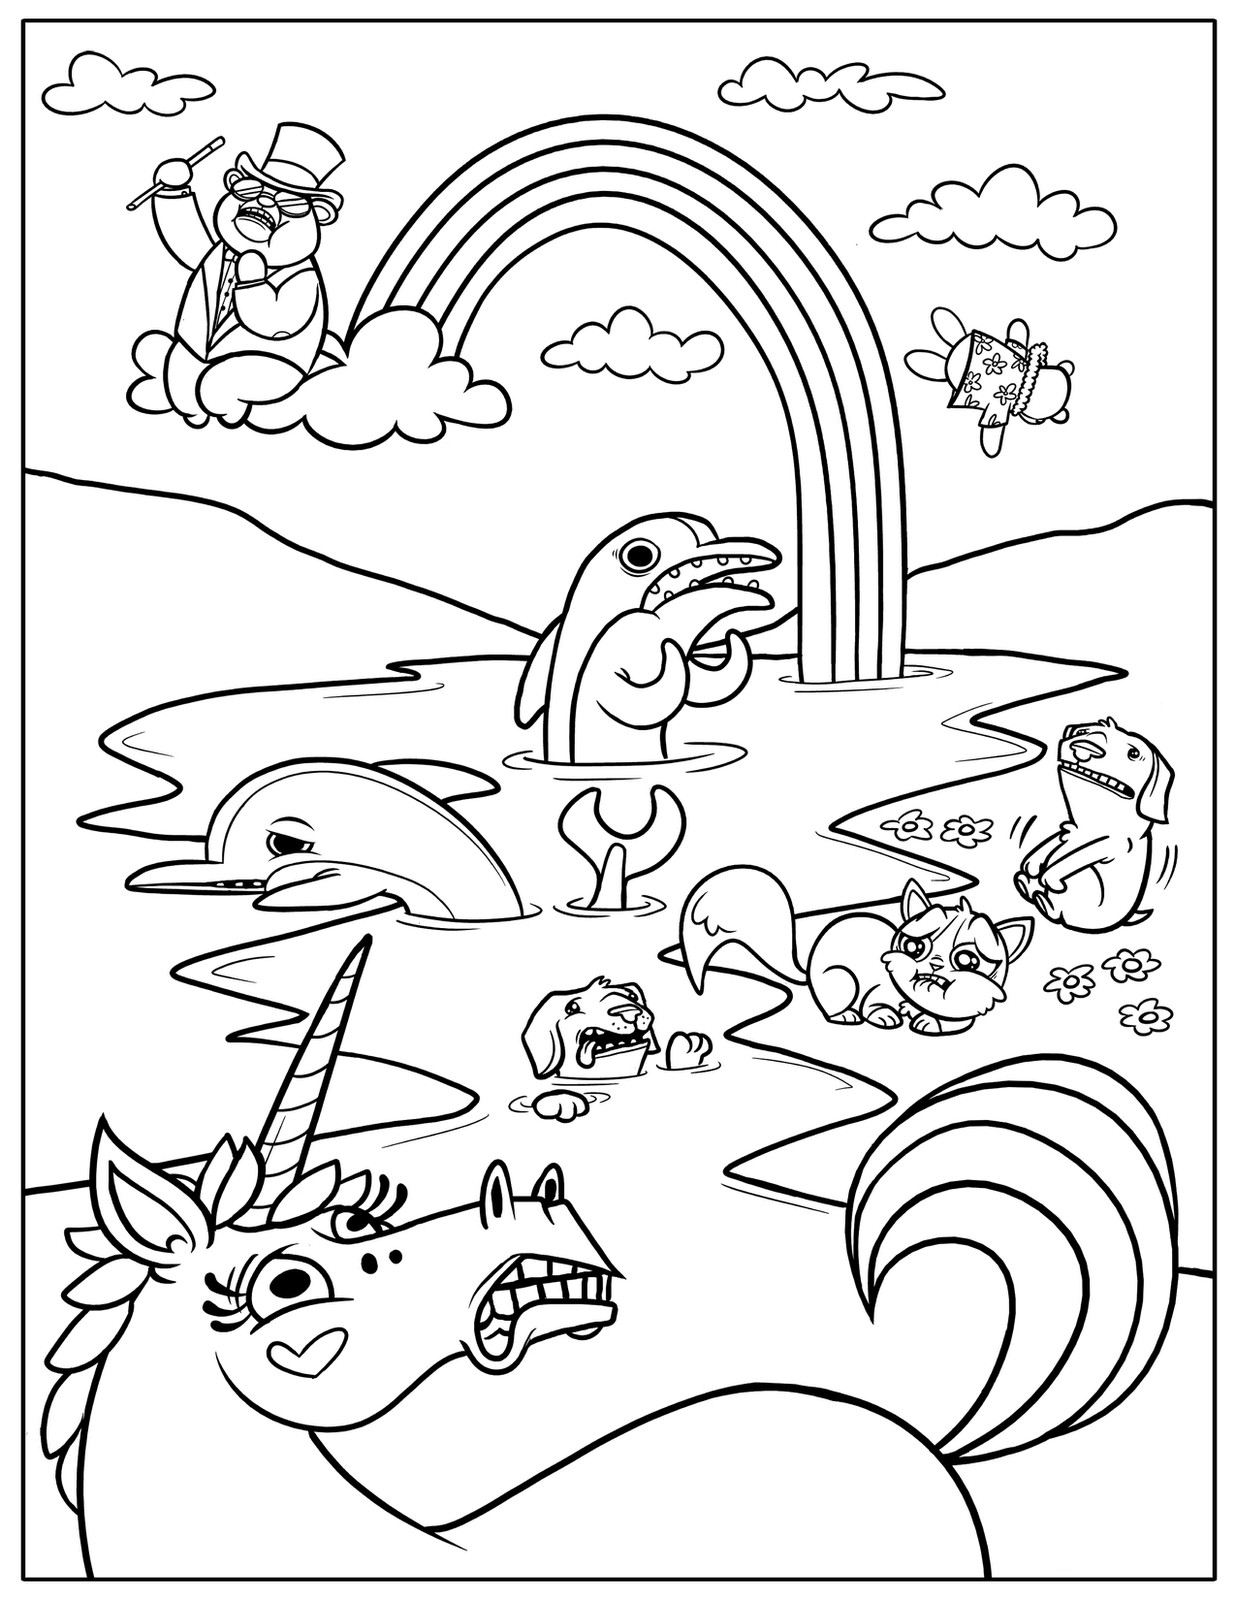 Coloring Pages For Kids To Print
 Free Printable Rainbow Coloring Pages For Kids